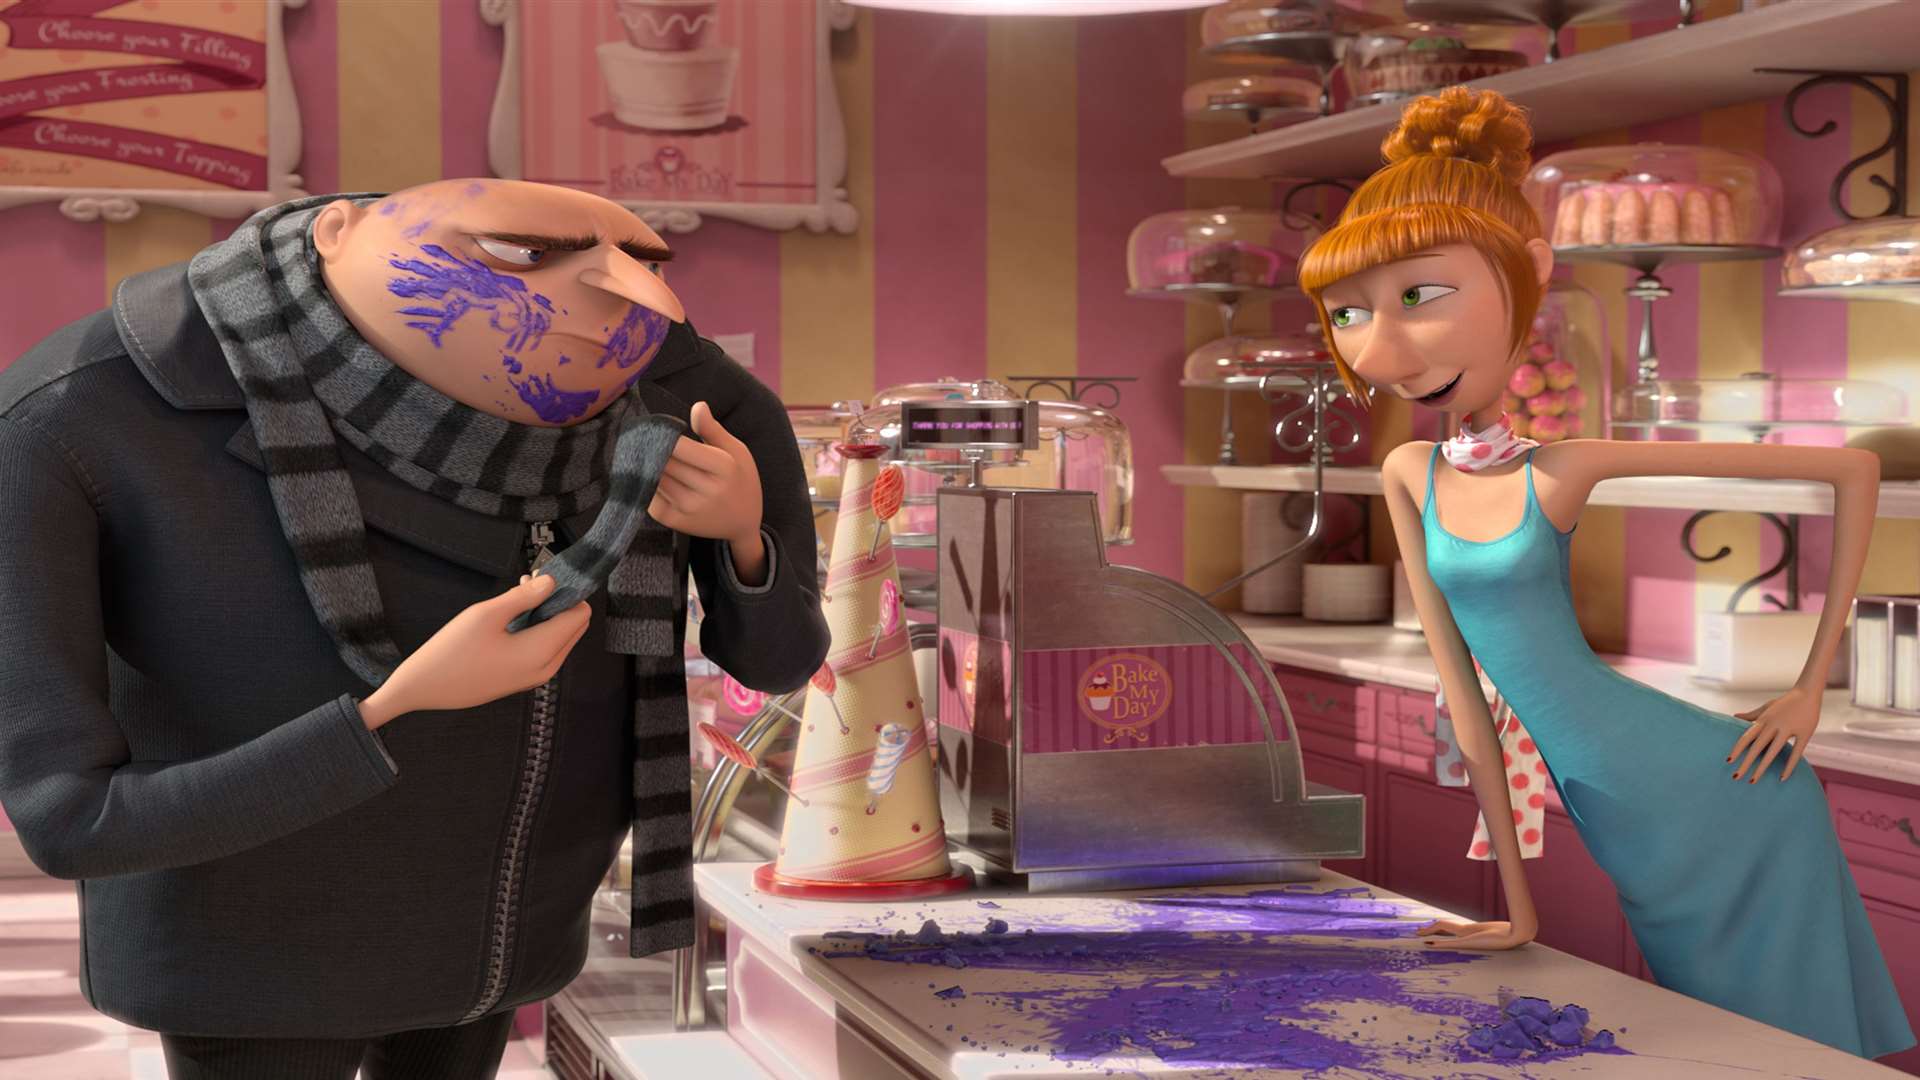 Gru (voiced by Steve Carell) and Lucy Wilde (voiced by Kristen Wiig) in Despicable Me 2. Picture: PA Photo/UPI Media